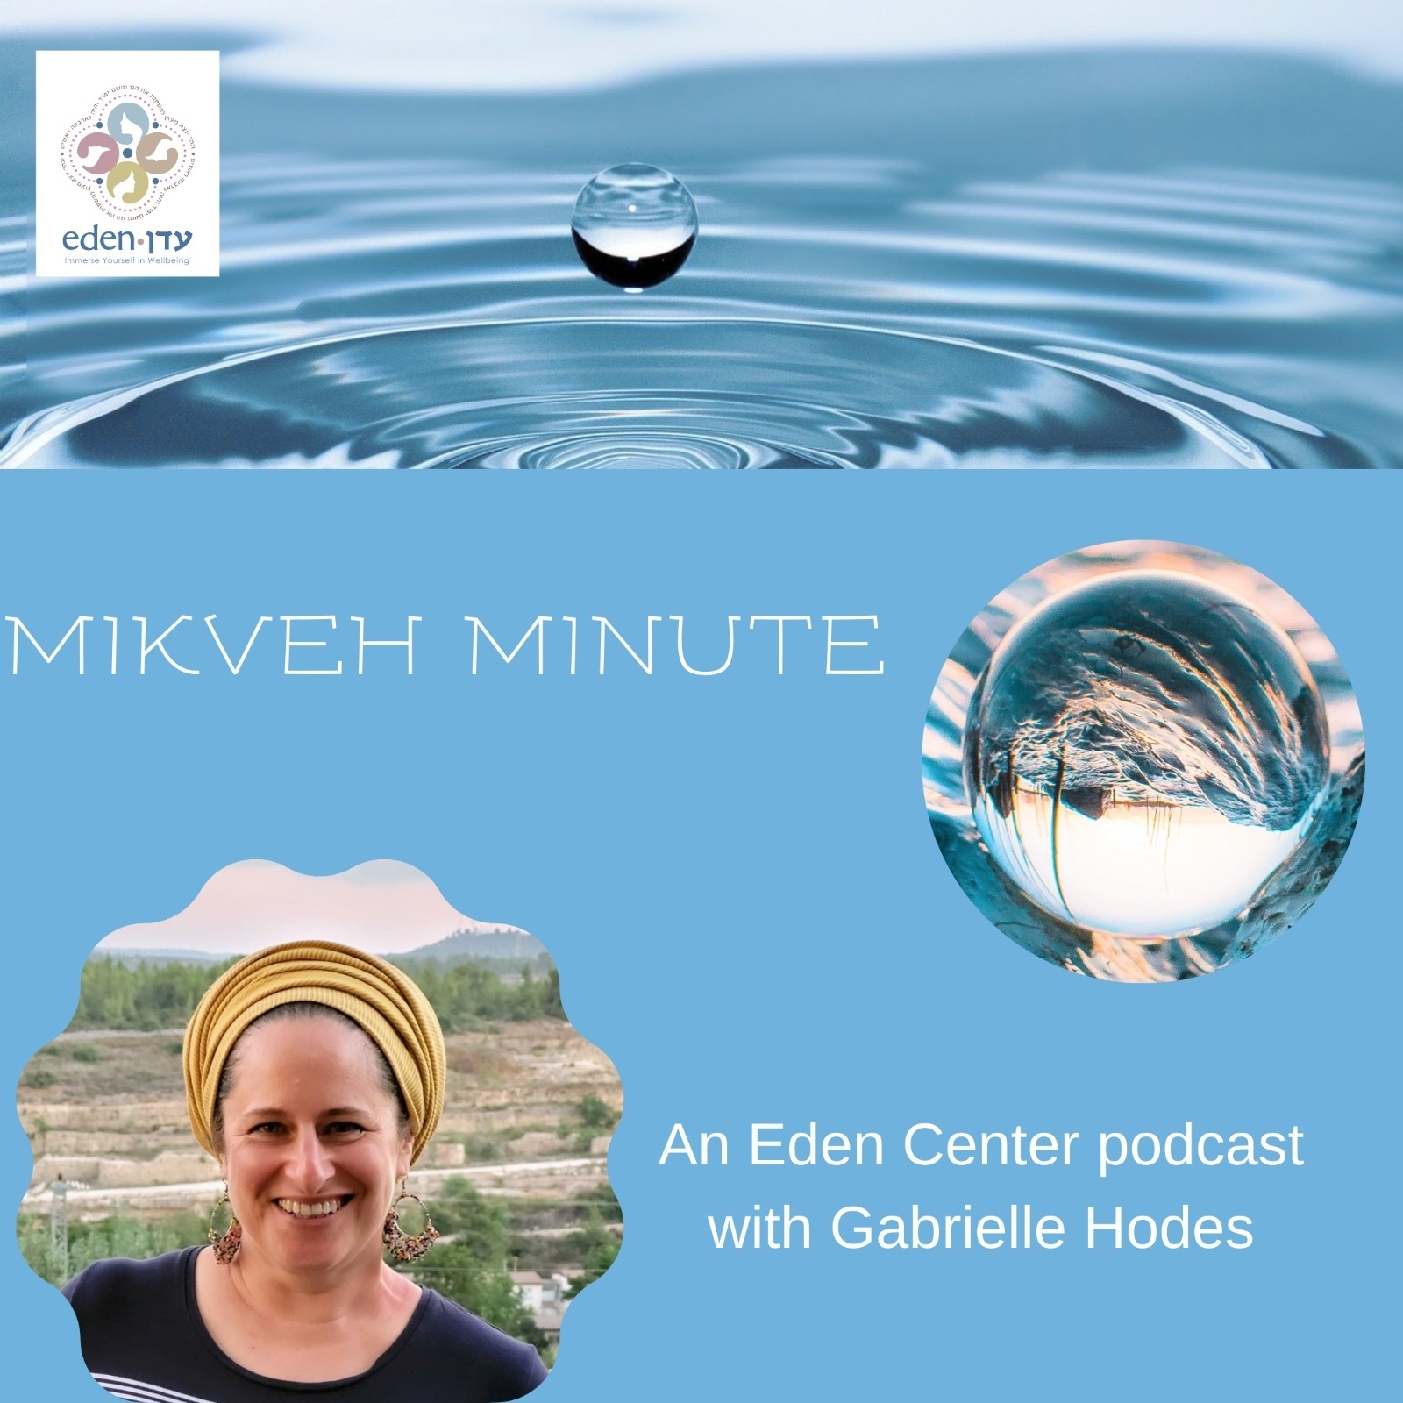 What Happens if a Woman Ovulates Before She Goes to the Mikveh?